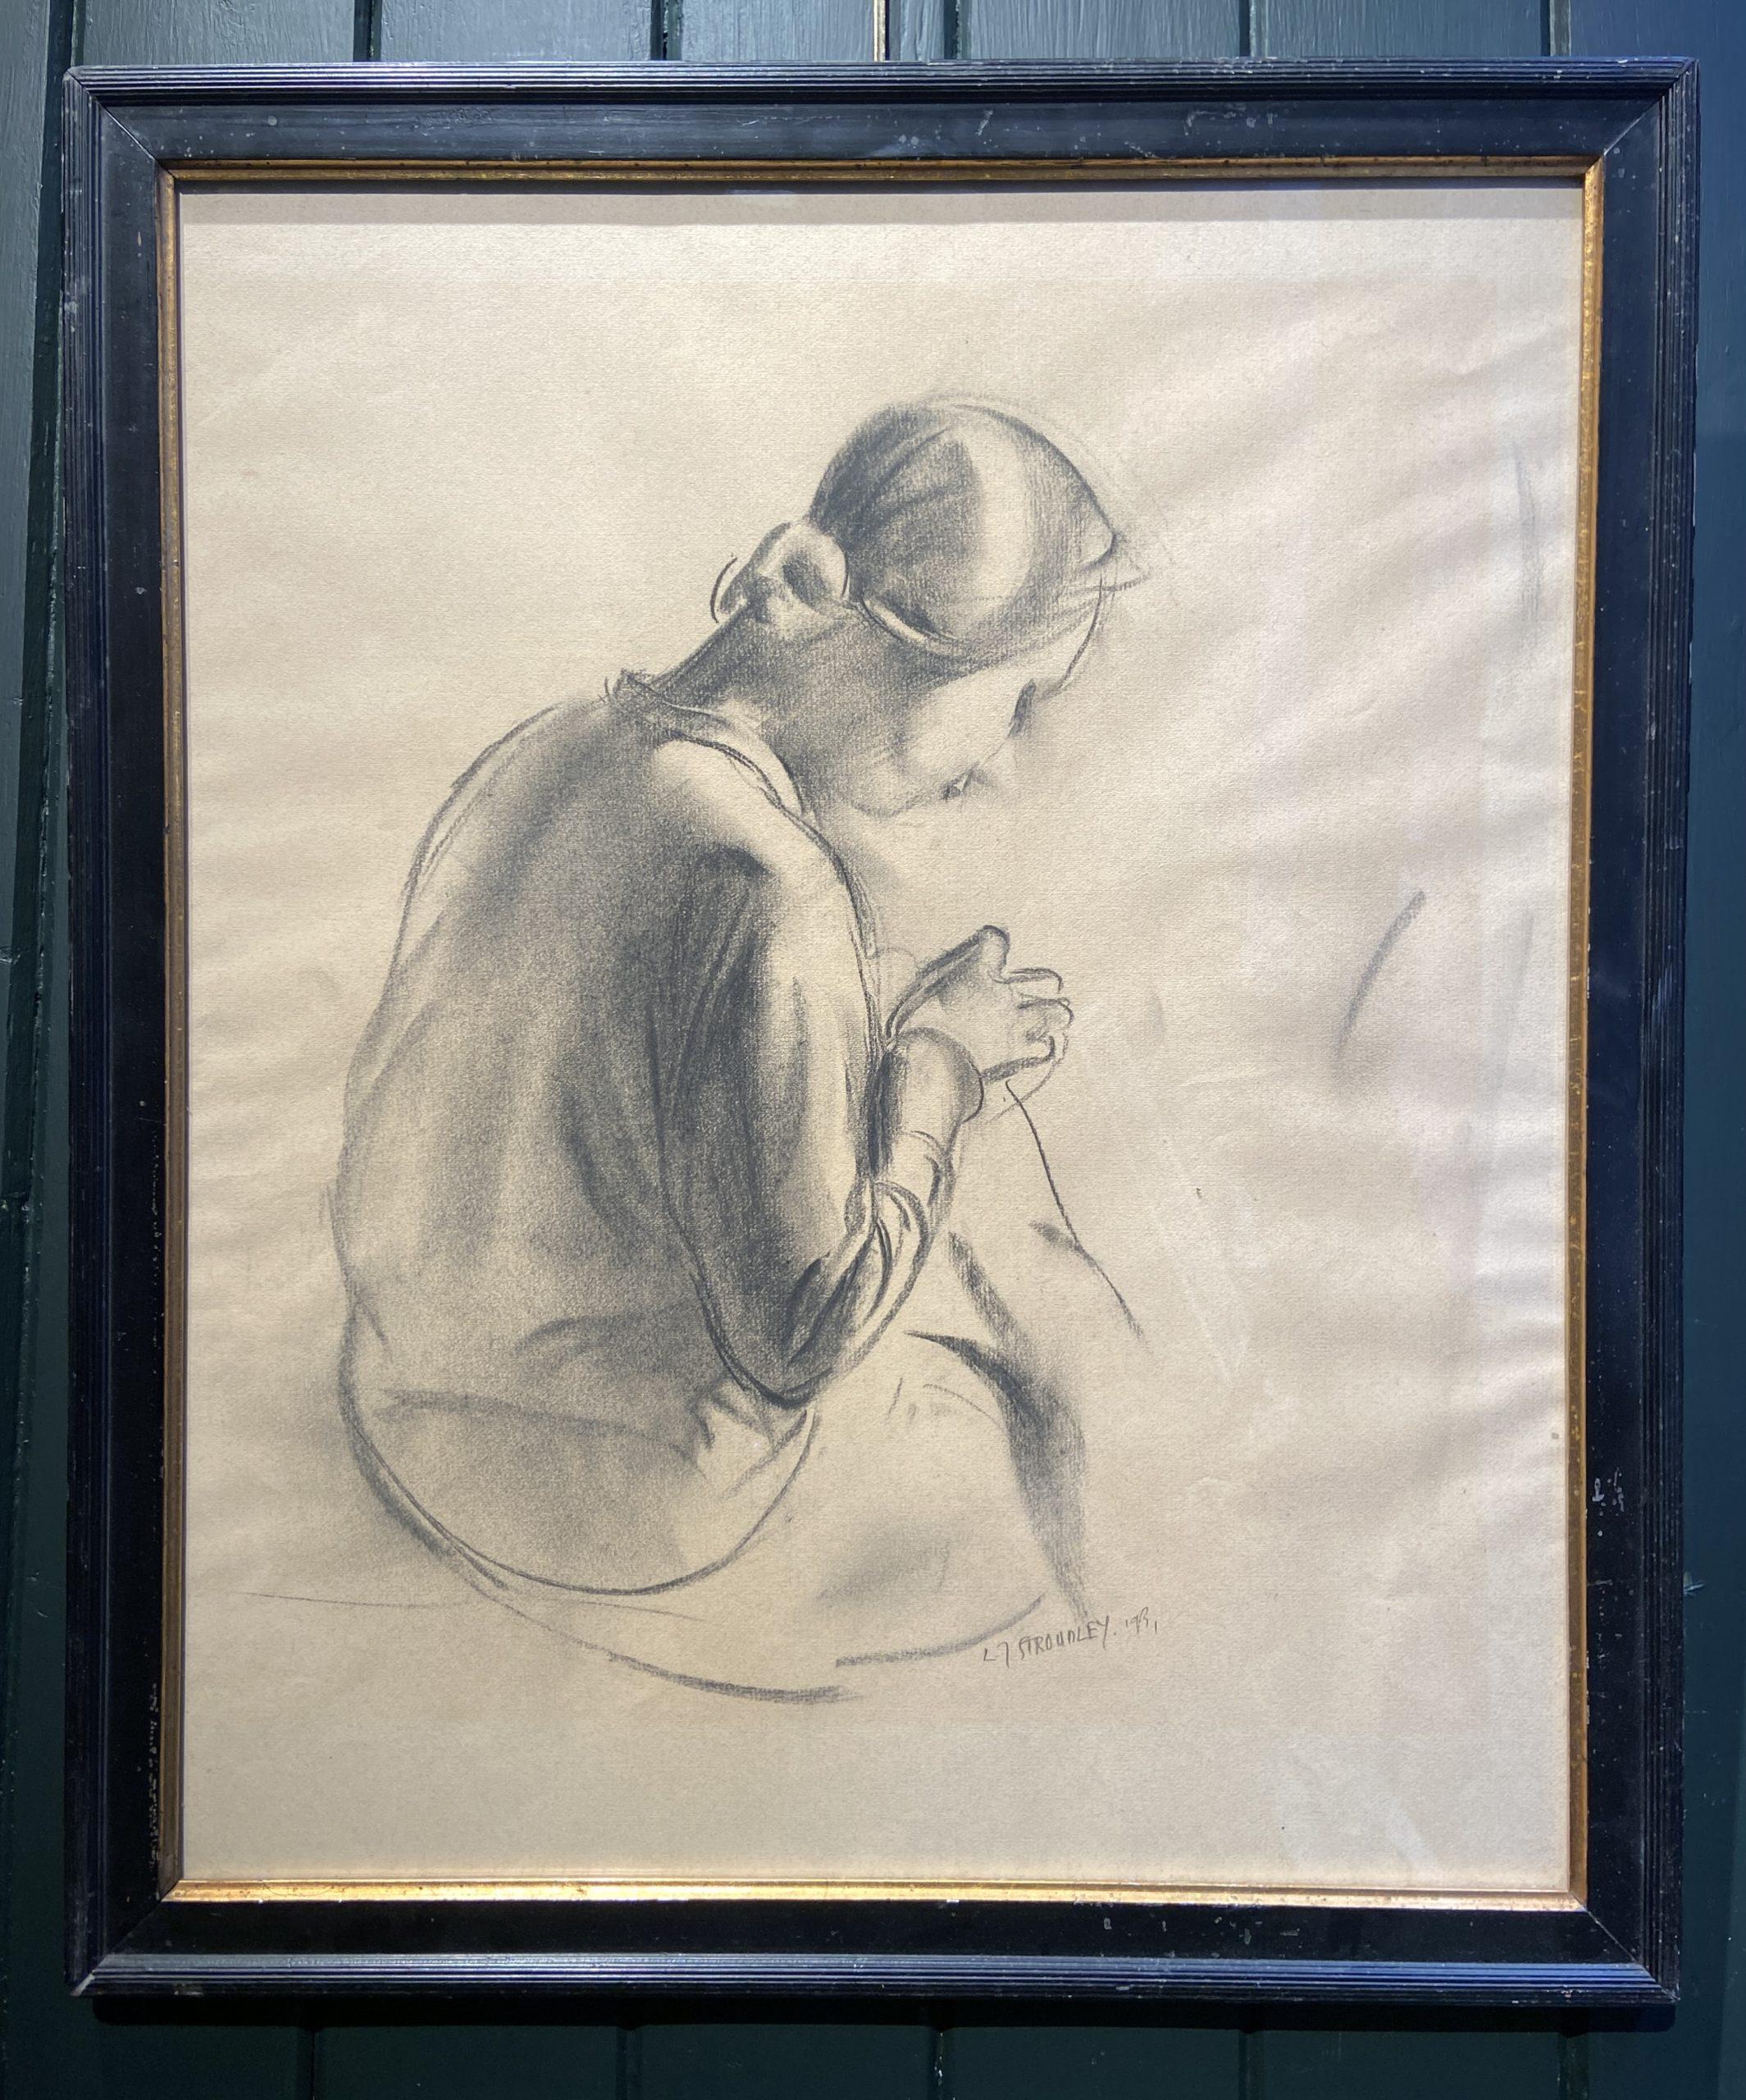 Graphite on paper, signed lower right
Image size: 17 x 21 inches (43.25 x 53.25 cm)
Contemporary frame


James Stroudley

Stroudley was born in London on 17 June 1906, the son of James Stroudley, showcard and ticket writer. He studied at Clapham